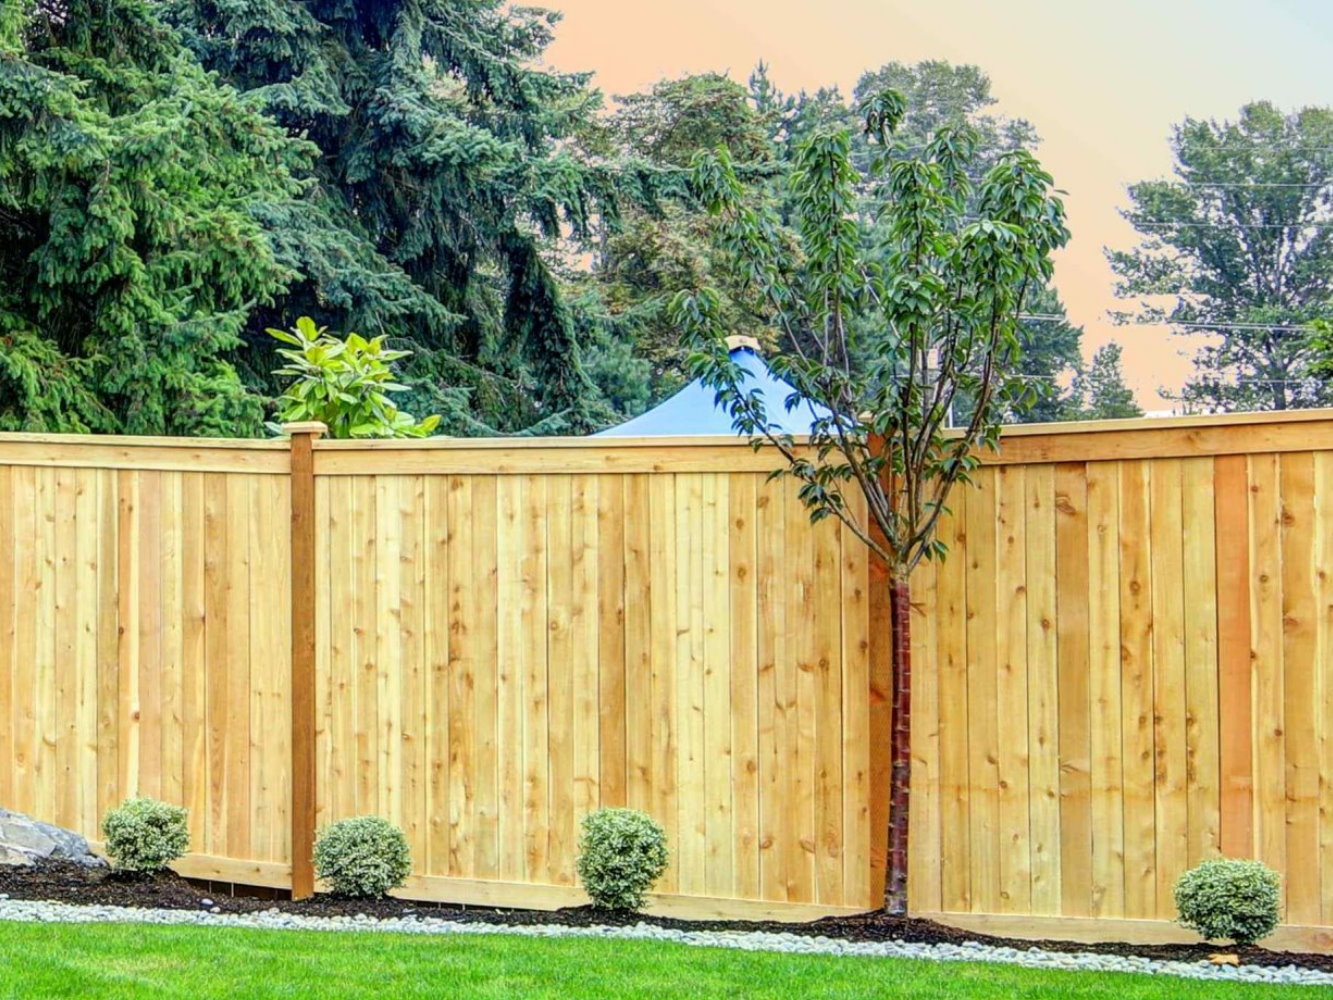 Bamberg SC cap and trim style wood fence